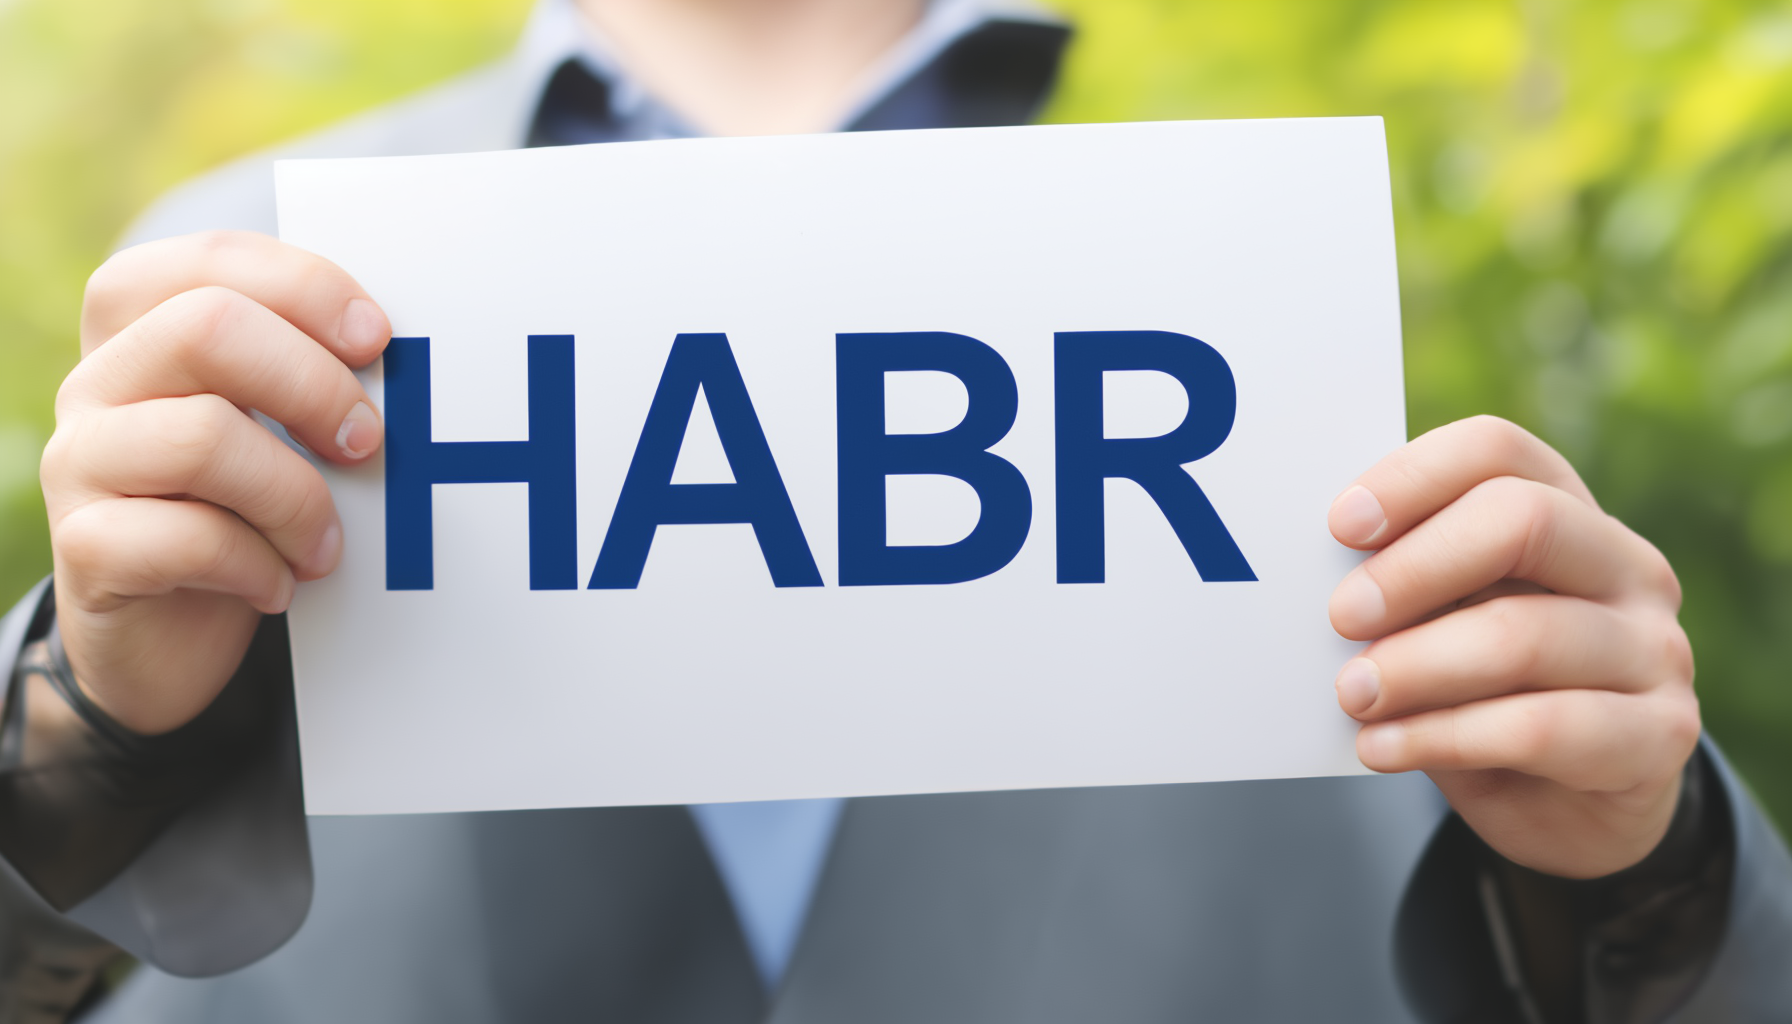 An image of a sign in the hands of a man with "Habr" written on it